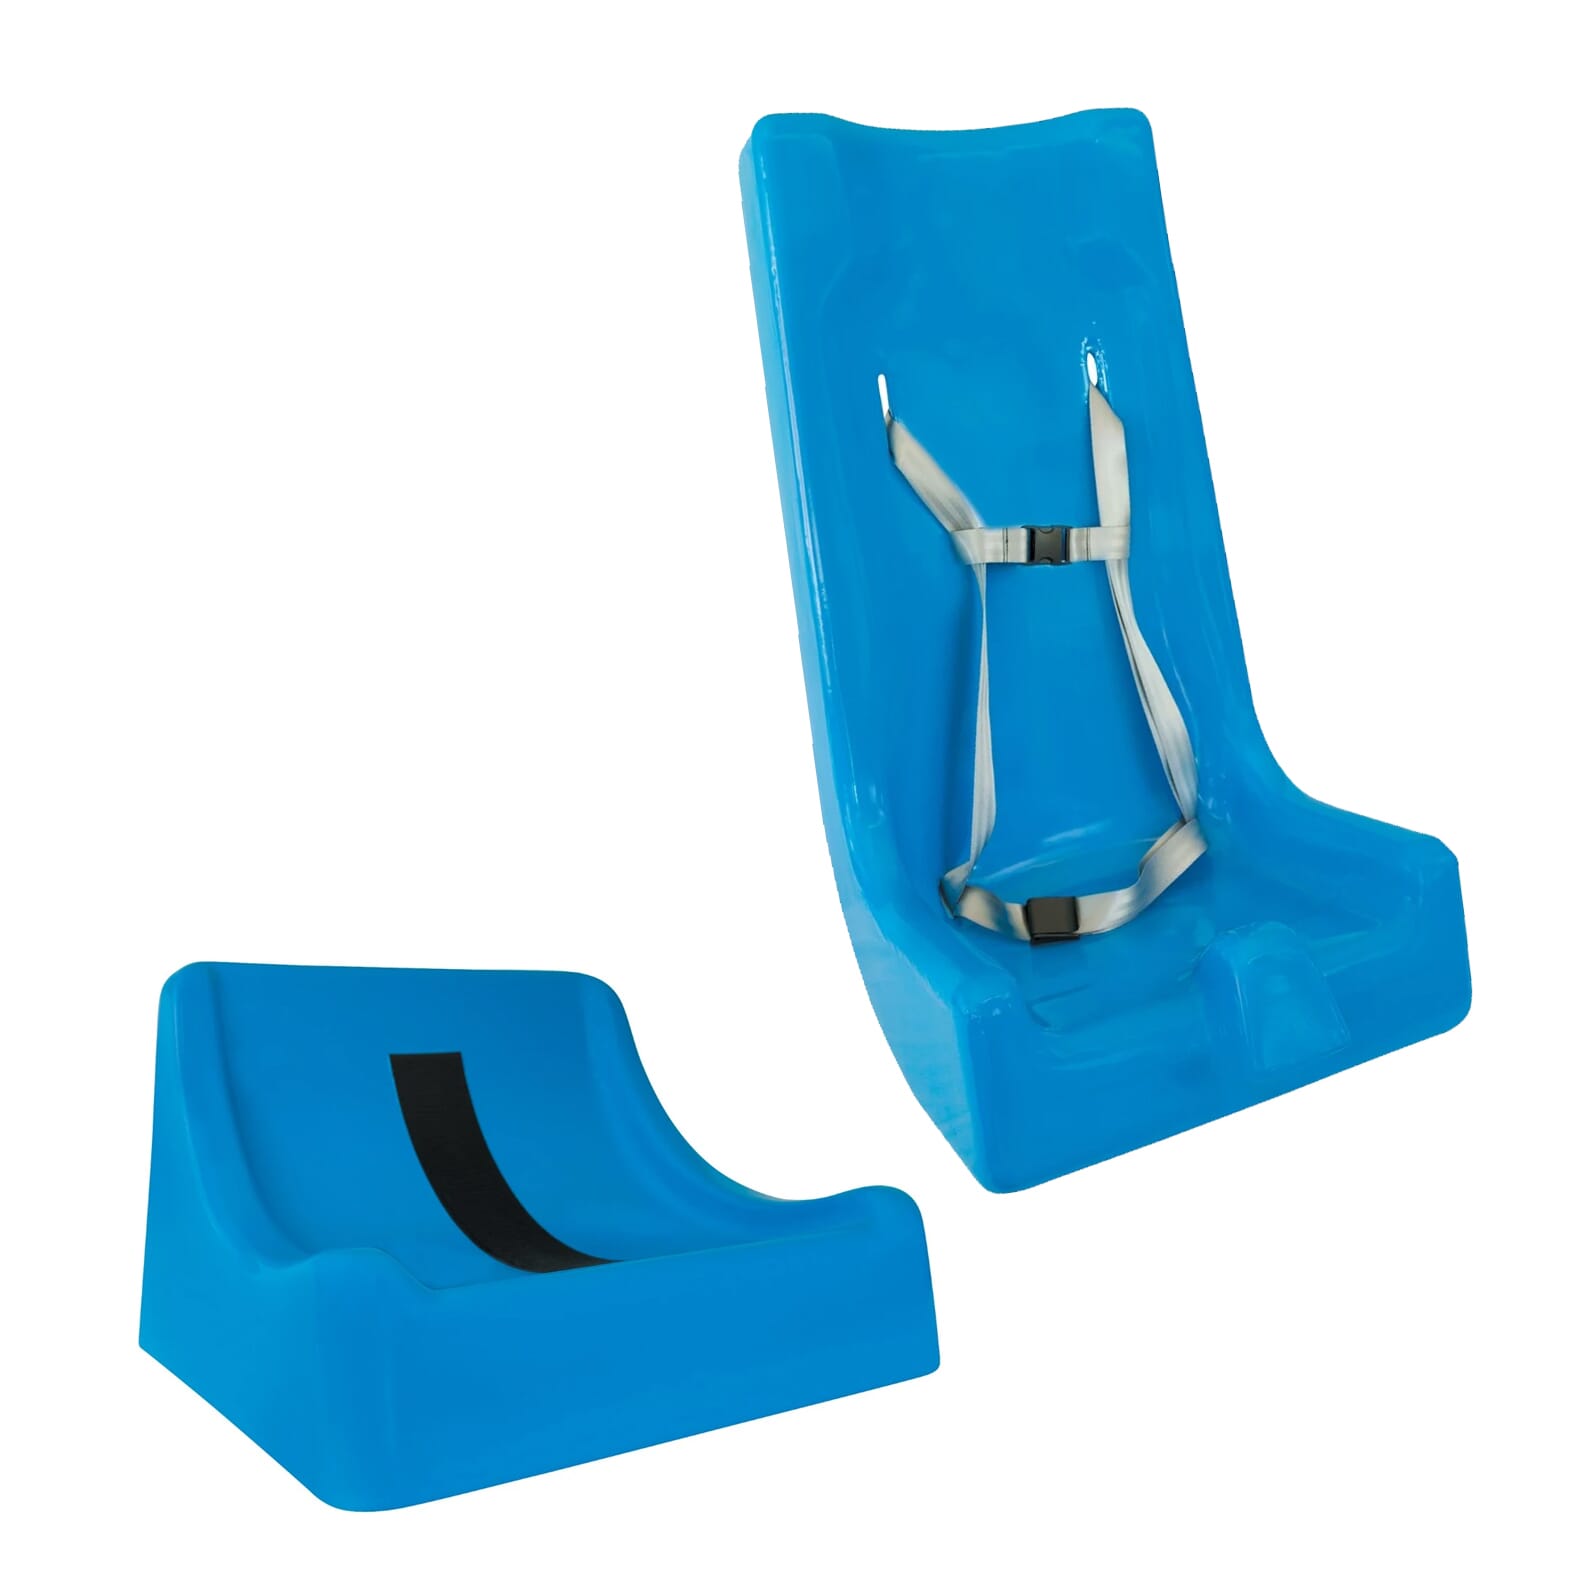 View Tumble Forms Deluxe Floor Sitter Set XLarge Blue information